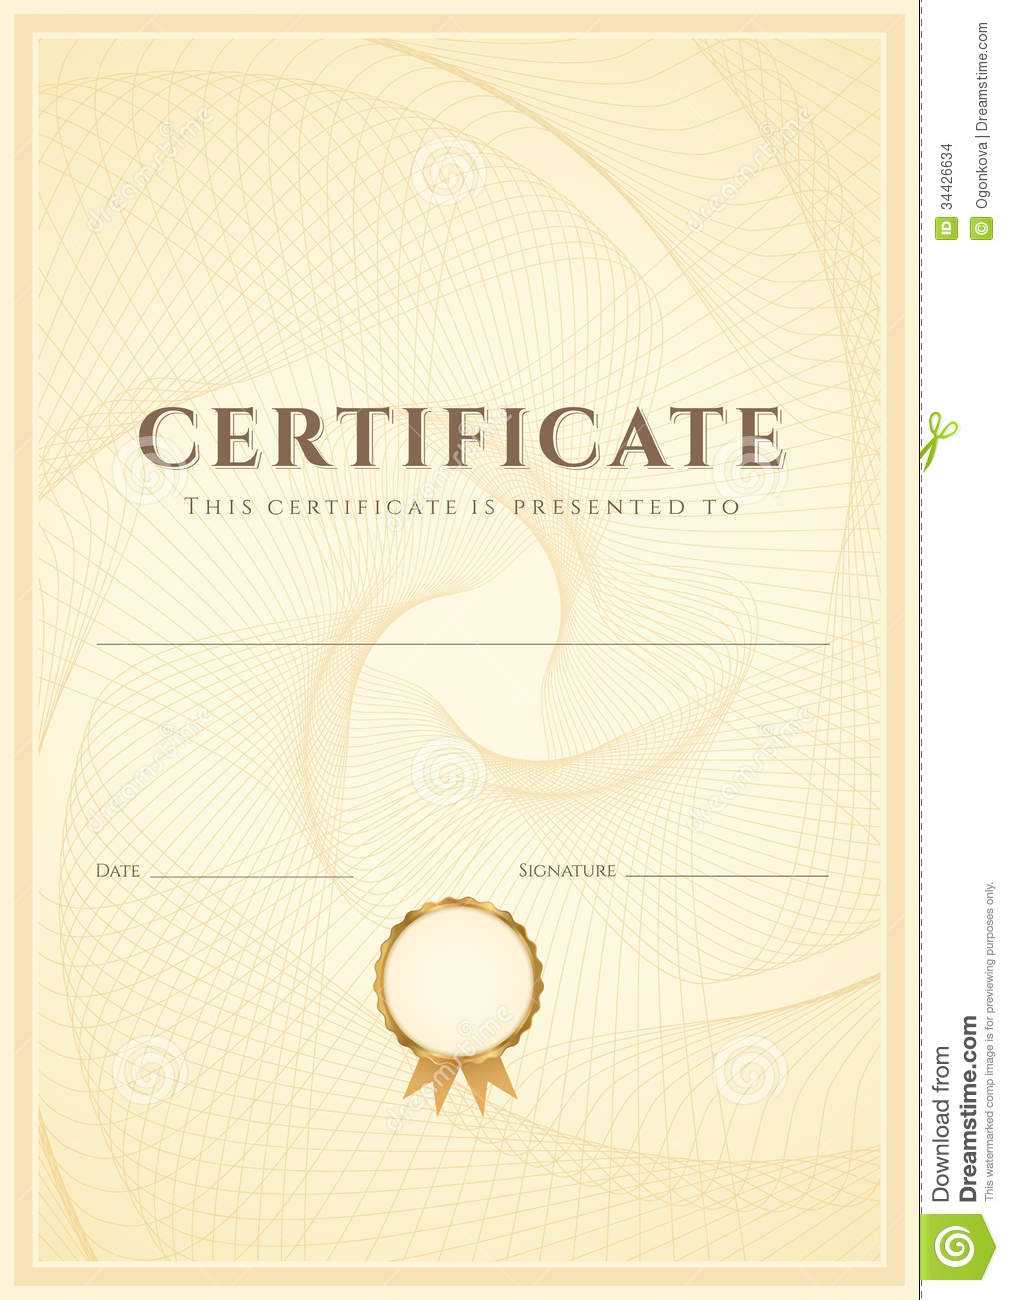 Certificate / Diploma Background Template. Pattern Stock With Scroll Certificate Templates